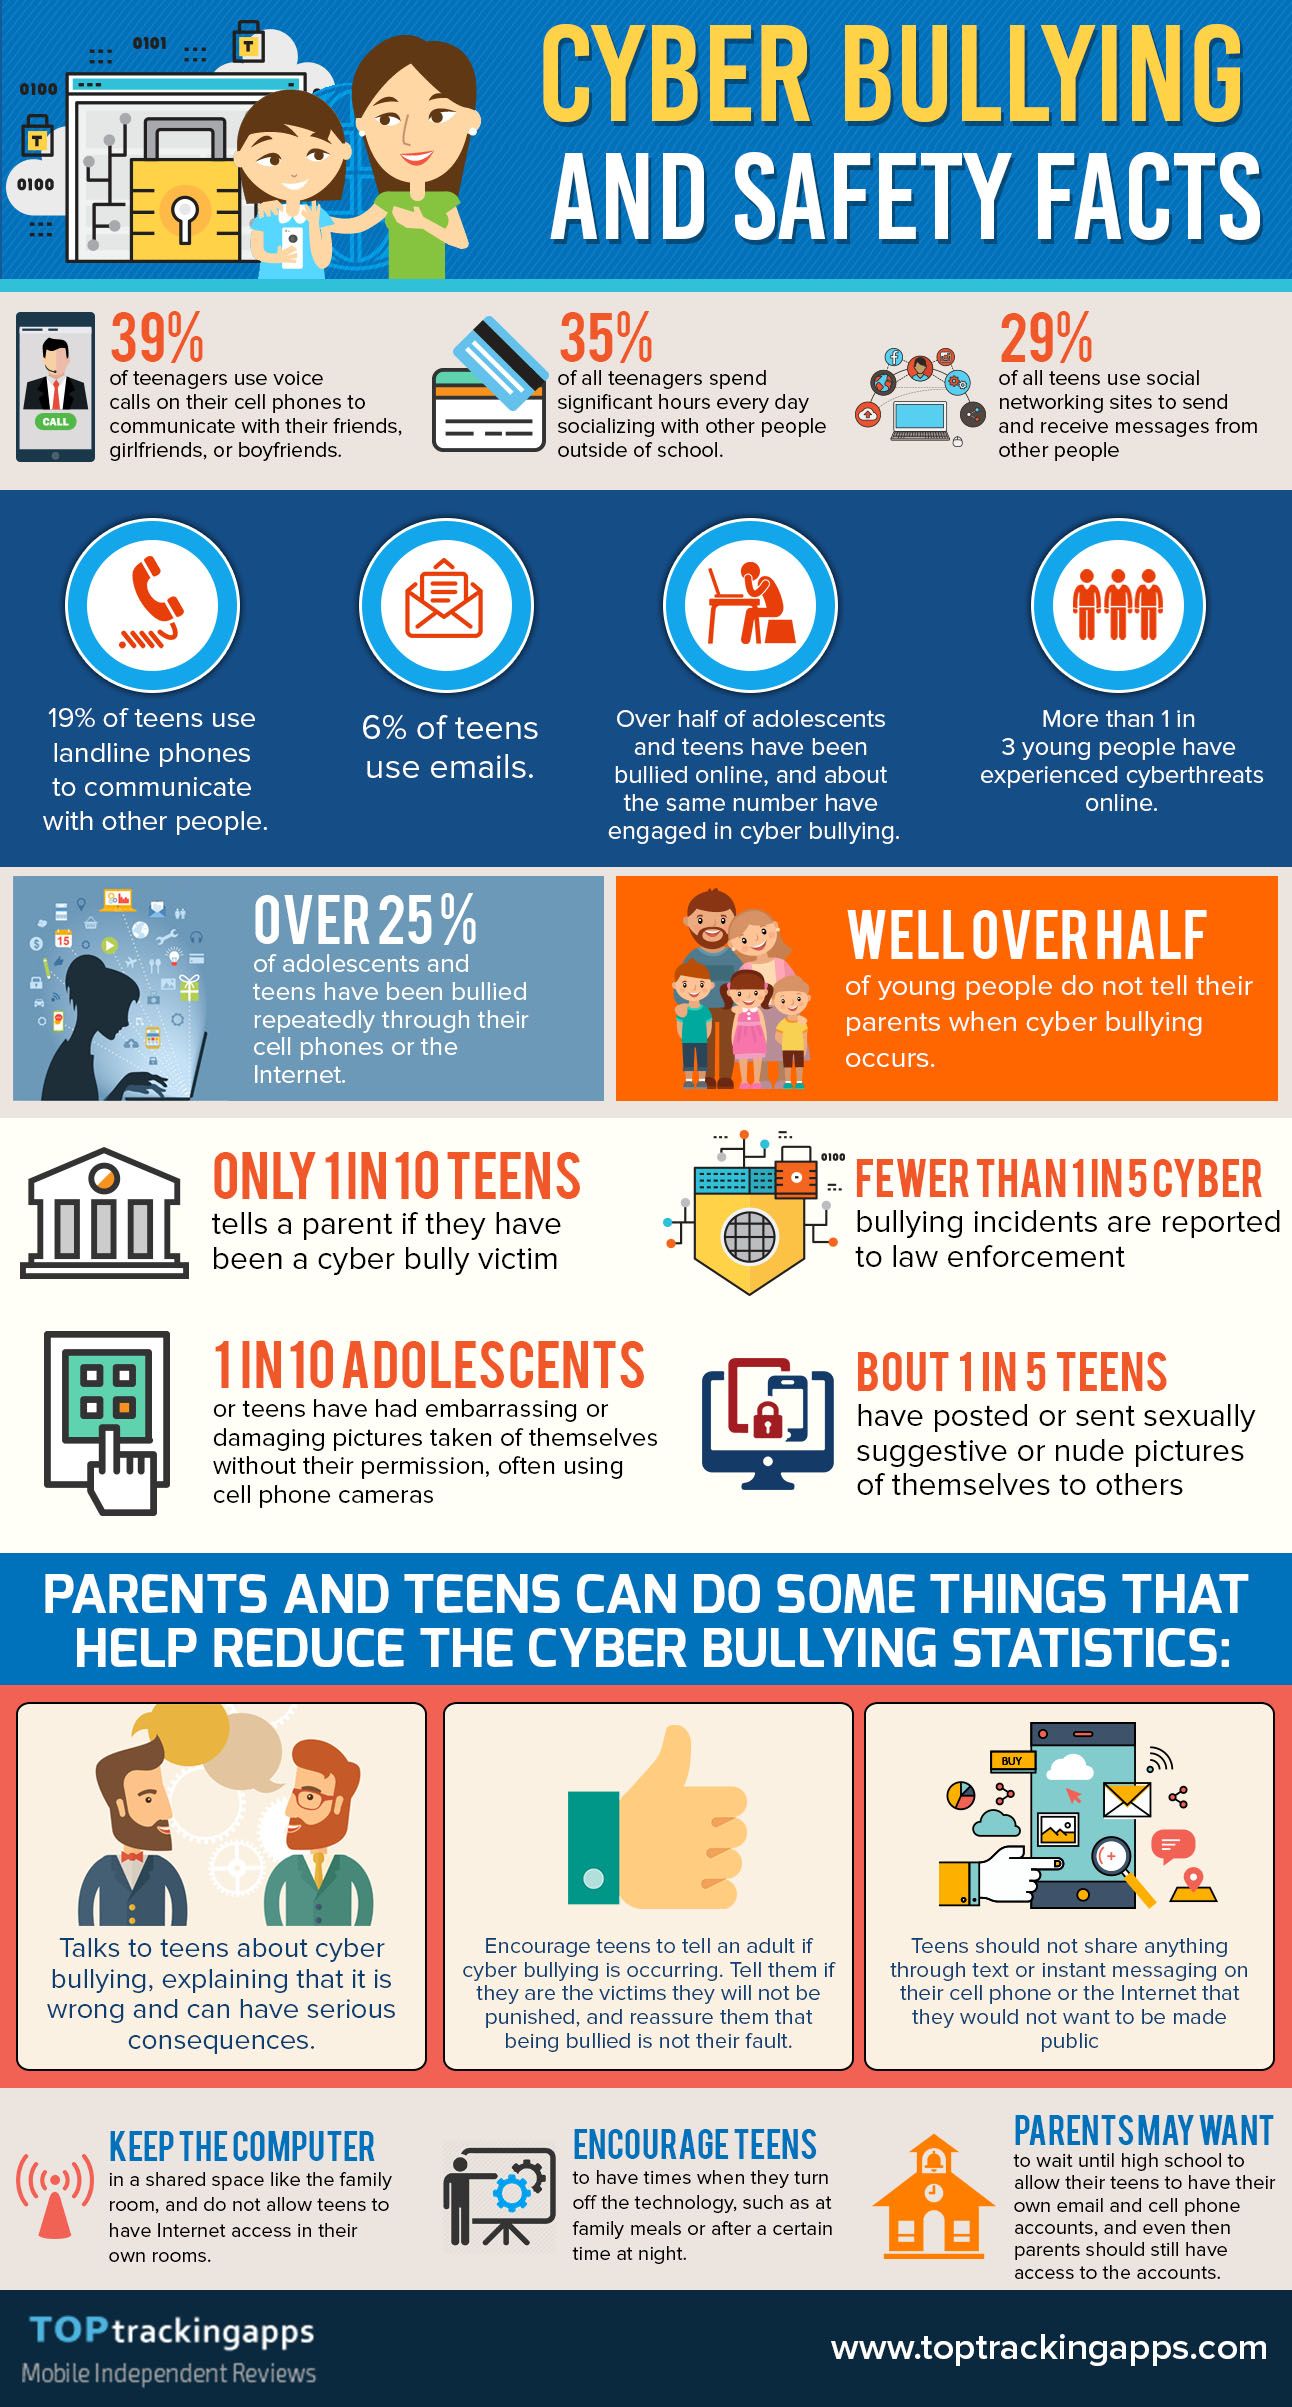 Cyber bullying and Safety Facts #Infographic ~ Visualistan